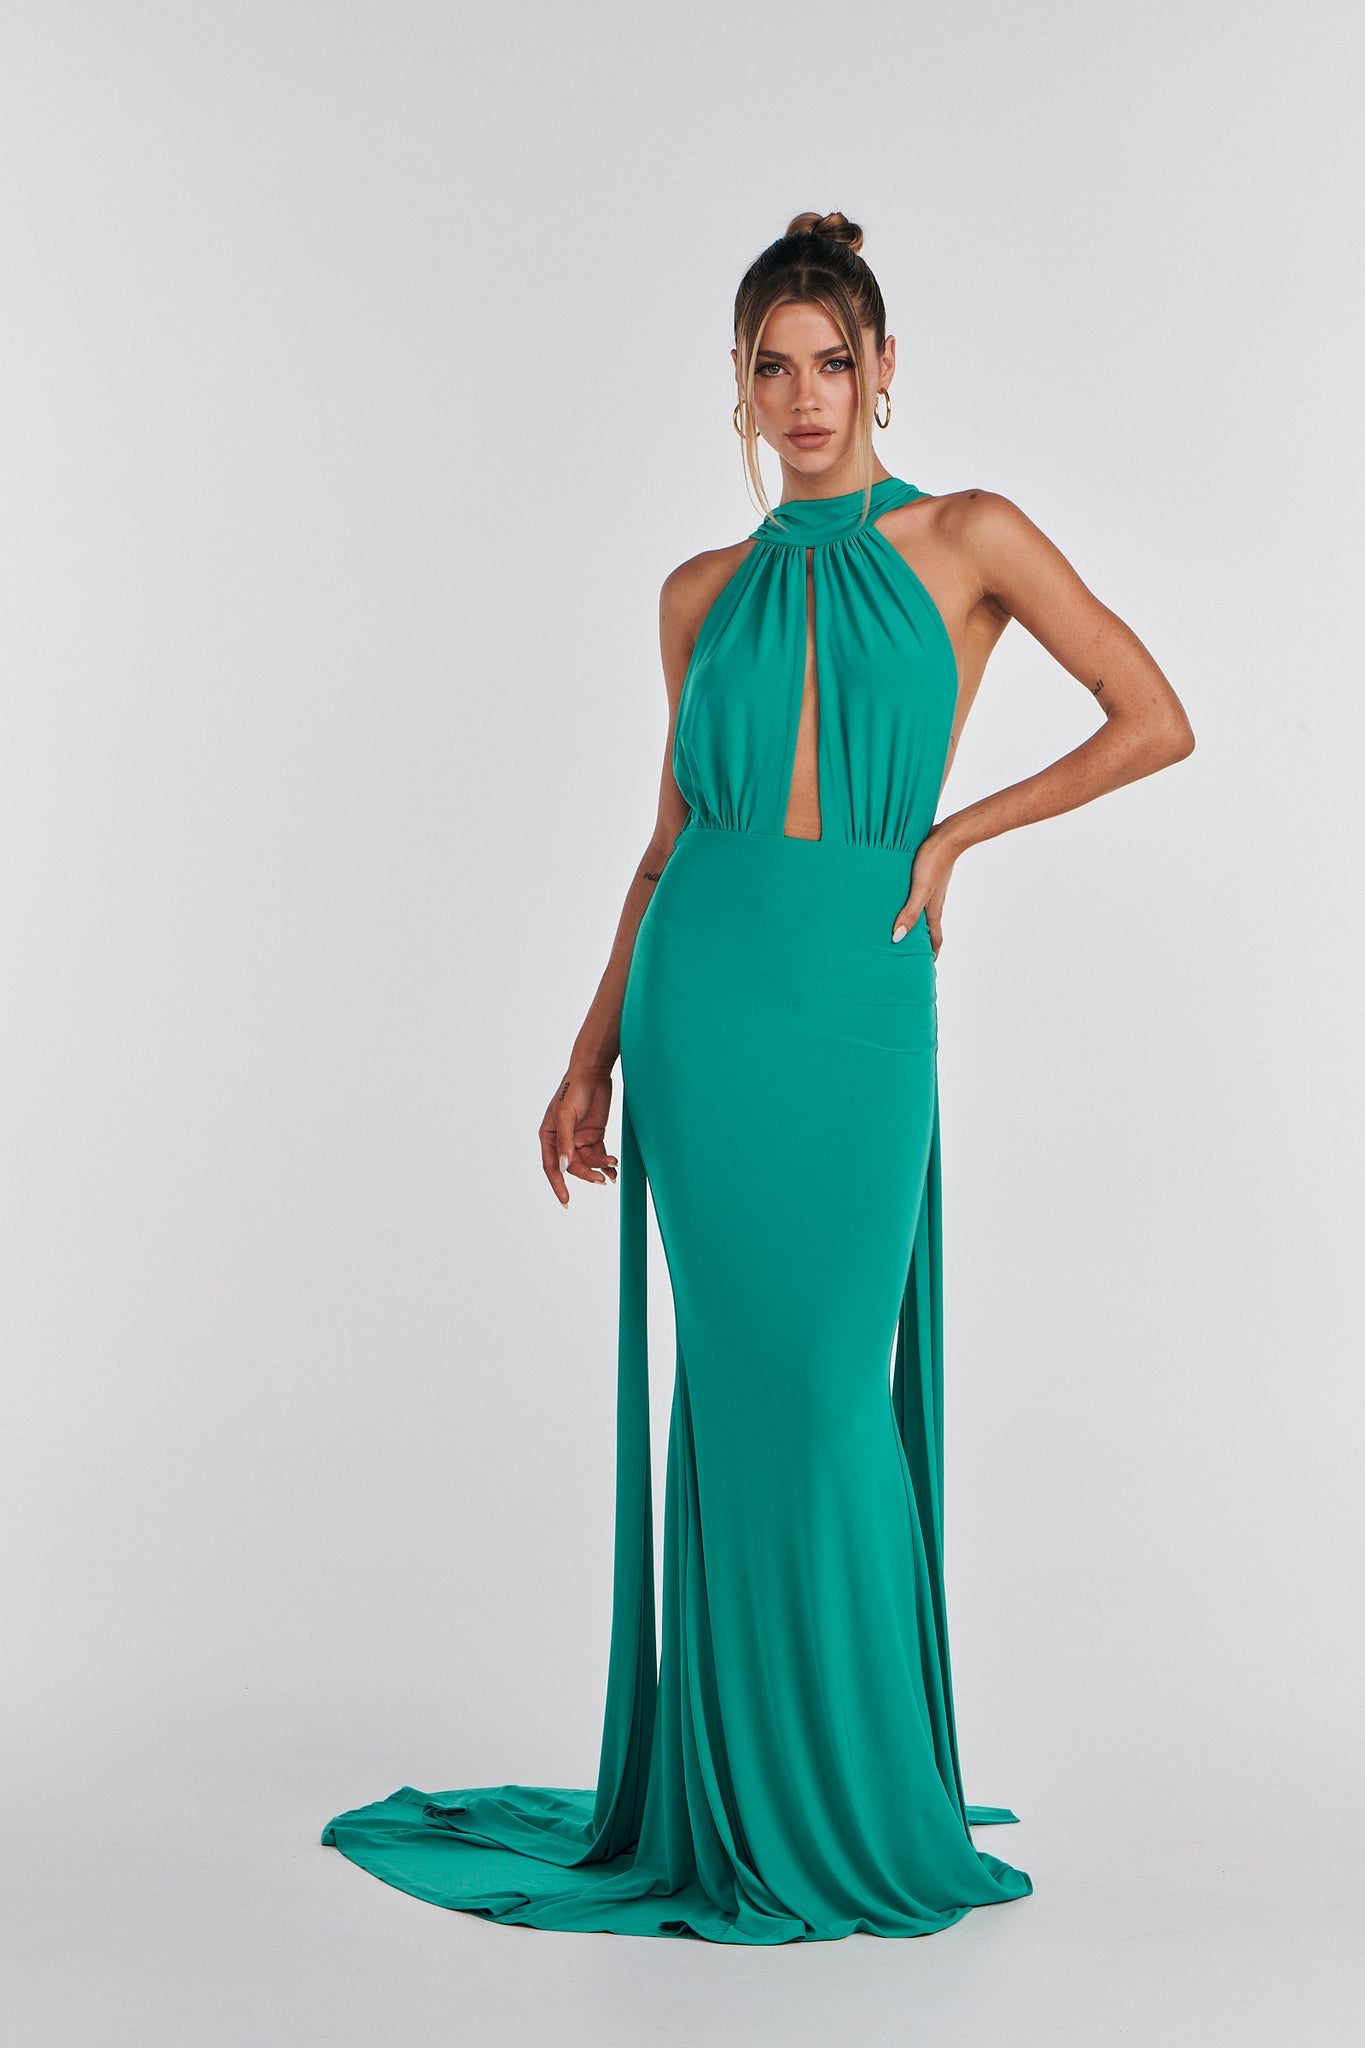 MÉLANI The Label LUCIA Jade Keyhole Neckline Backless Bridesmaid Formal Gown